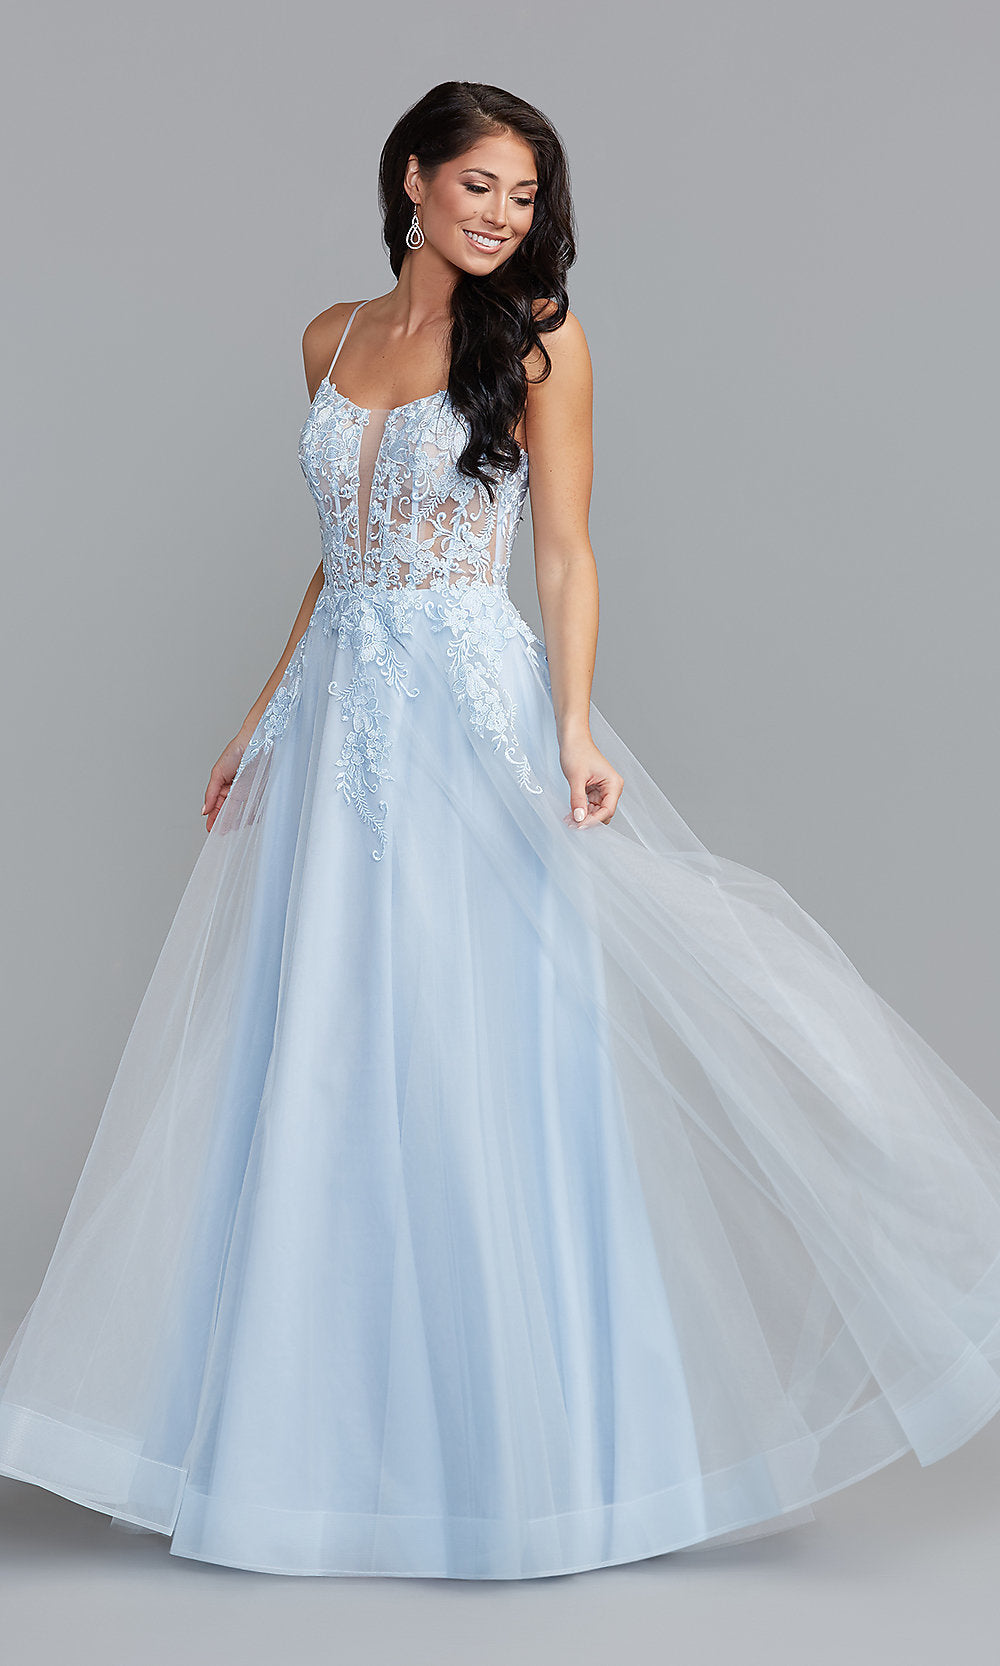 Soft Blue Embroidered Sheer-Bodice Long Blue Prom Dress